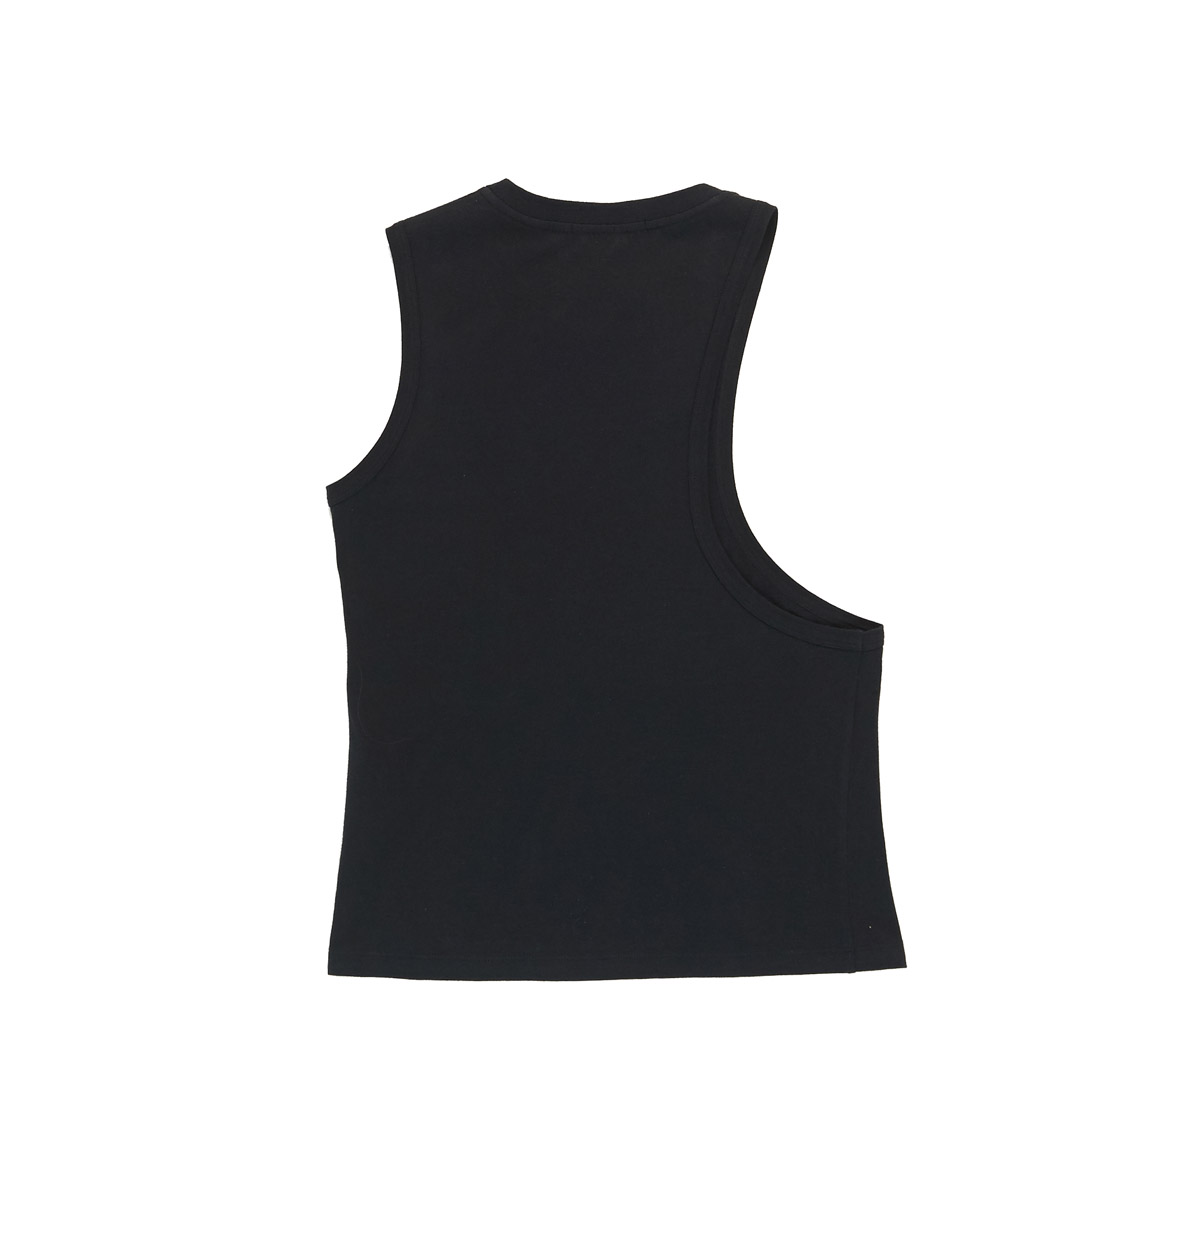 Classic asymmetric 'nipple' tank top in Egyptian cotton jersey, Helmut Lang S/S 2004.